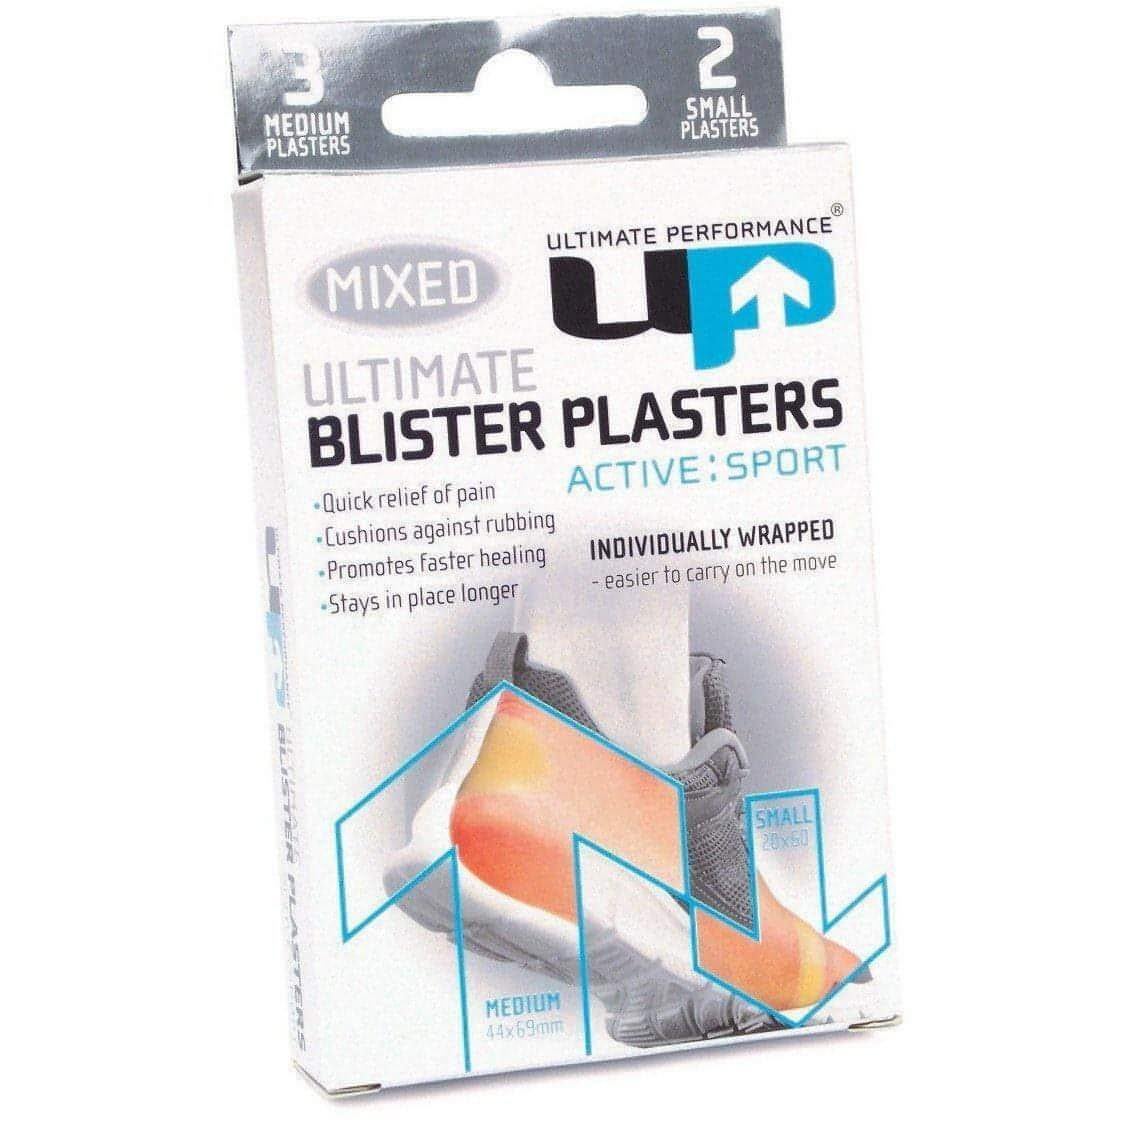 Ultimate Performance Mixed Blister Plasters 5060242686573 - Start Fitness